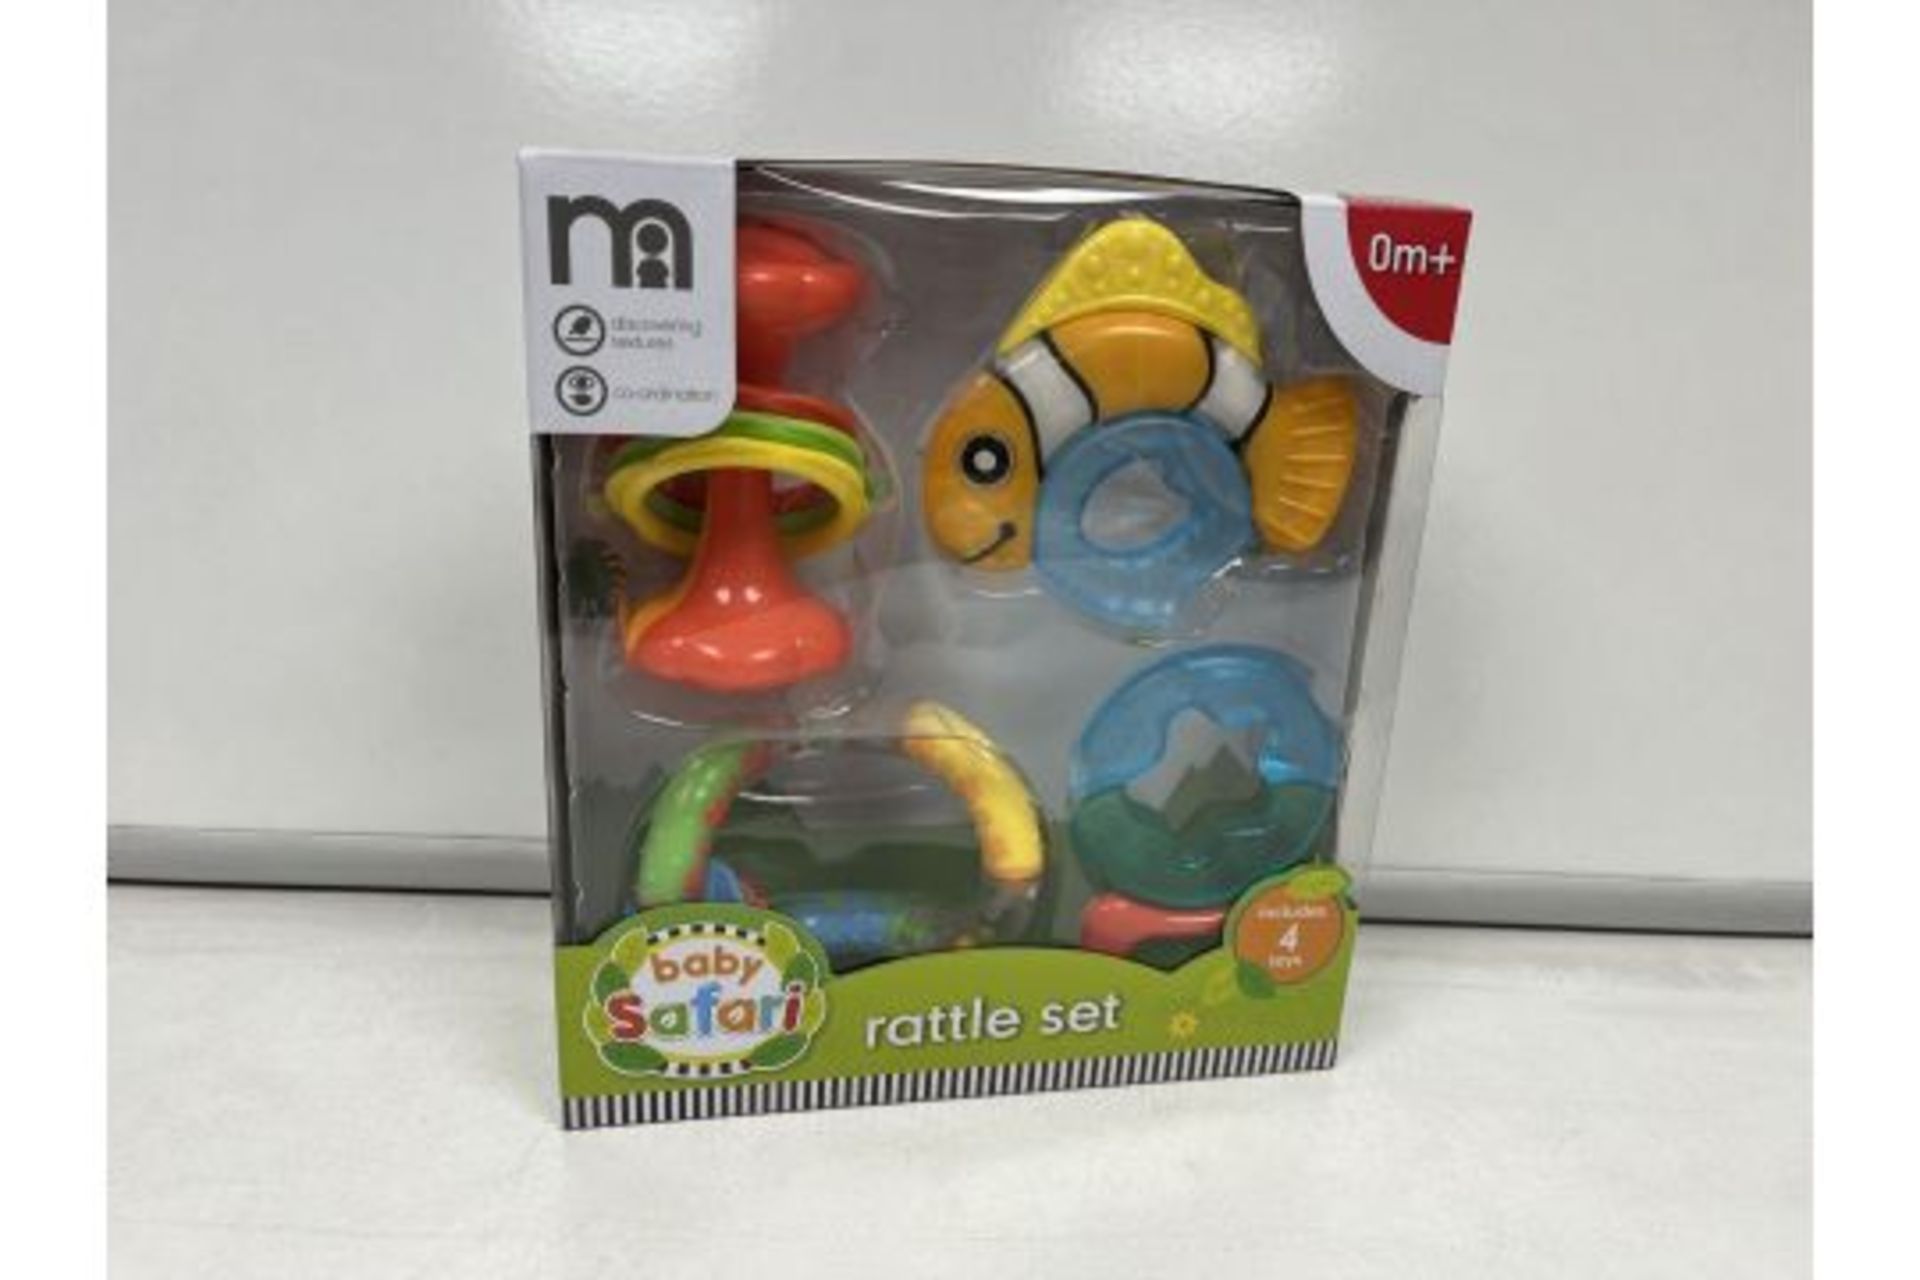 8 X NEW BOXED BABY SAFARI RATTLE SET - INCLUDES 4 TOYS. RRP £30 EACH. (ROW9) 0M+. DISCOVERING